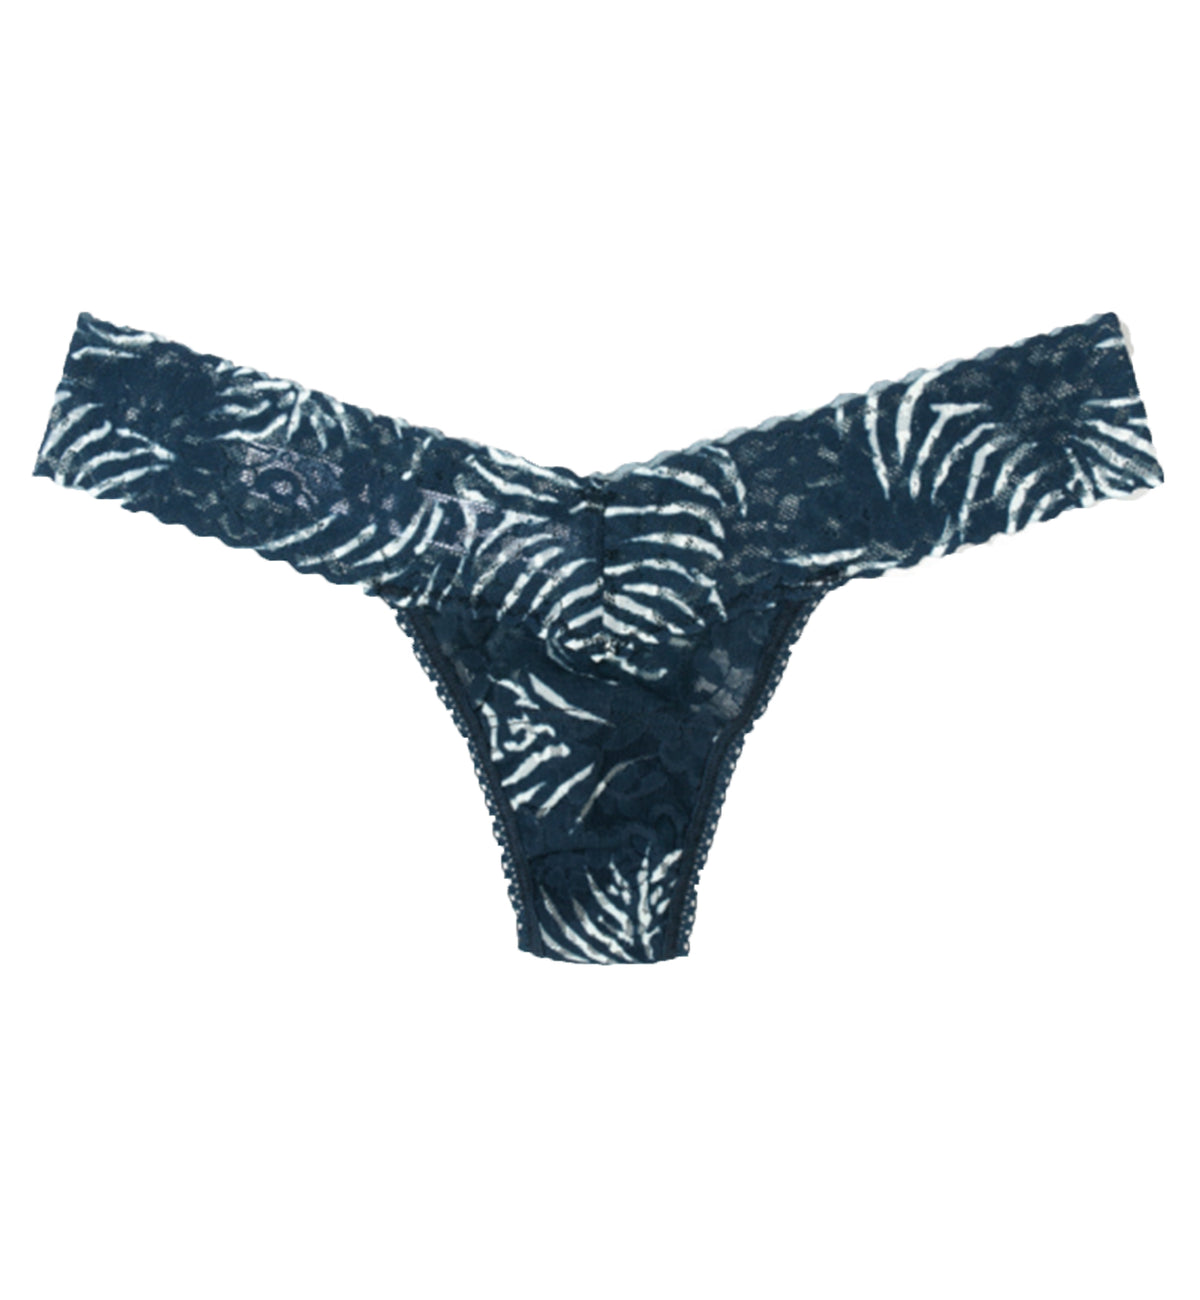 Hanky Panky Signature Lace Printed Low Rise Thong (PR4911P),Runaway - Runaway,One Size